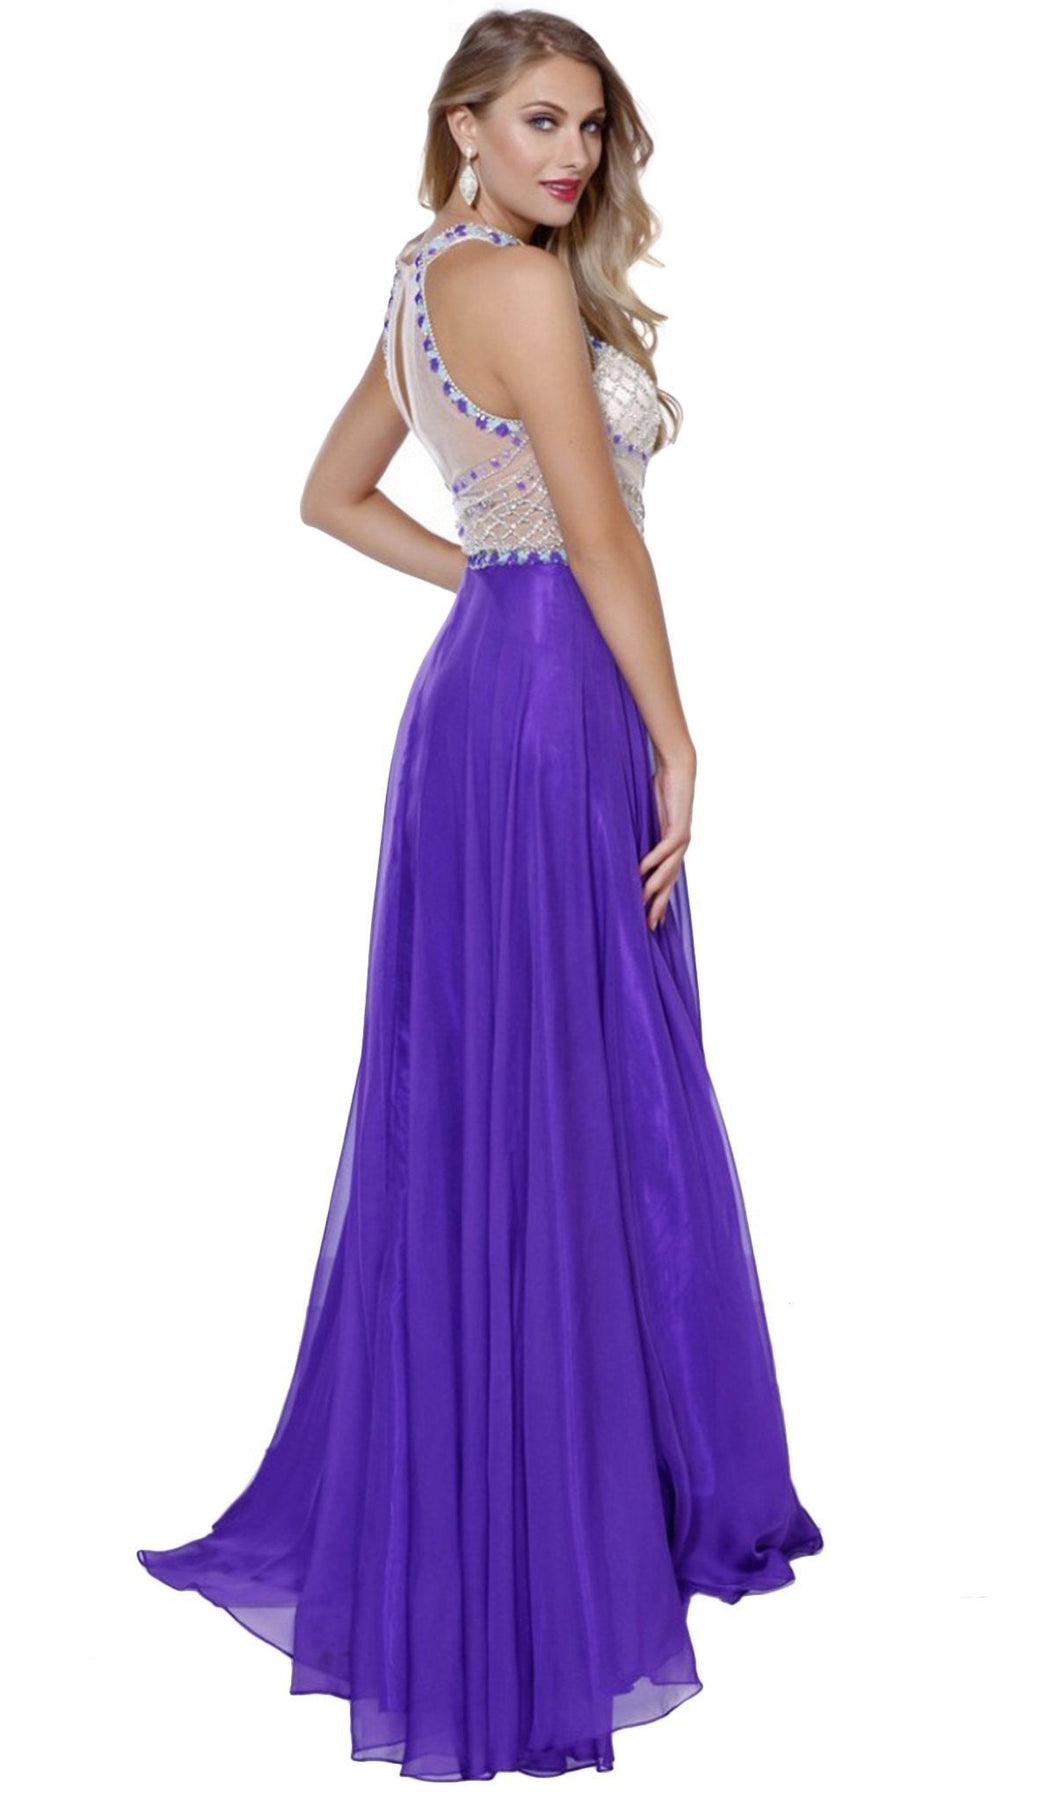 Nox Anabel - 8200 Bejeweled Halter Chiffon A-line Dress Special Occasion Dress